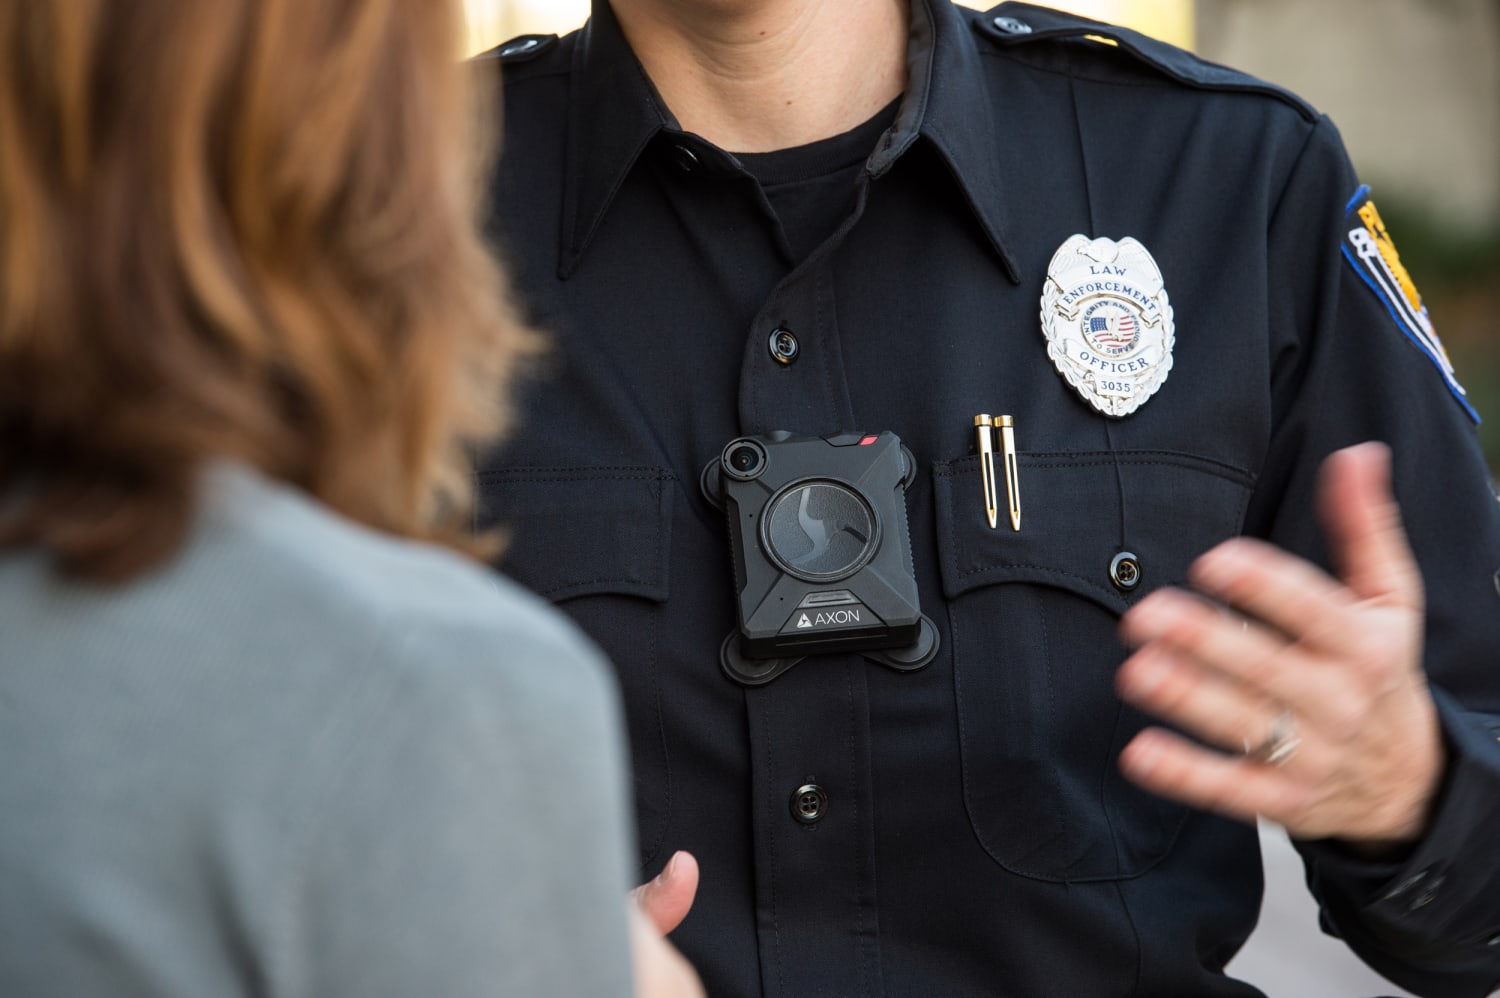 Police body cam maker unveils new features it hopes will curb